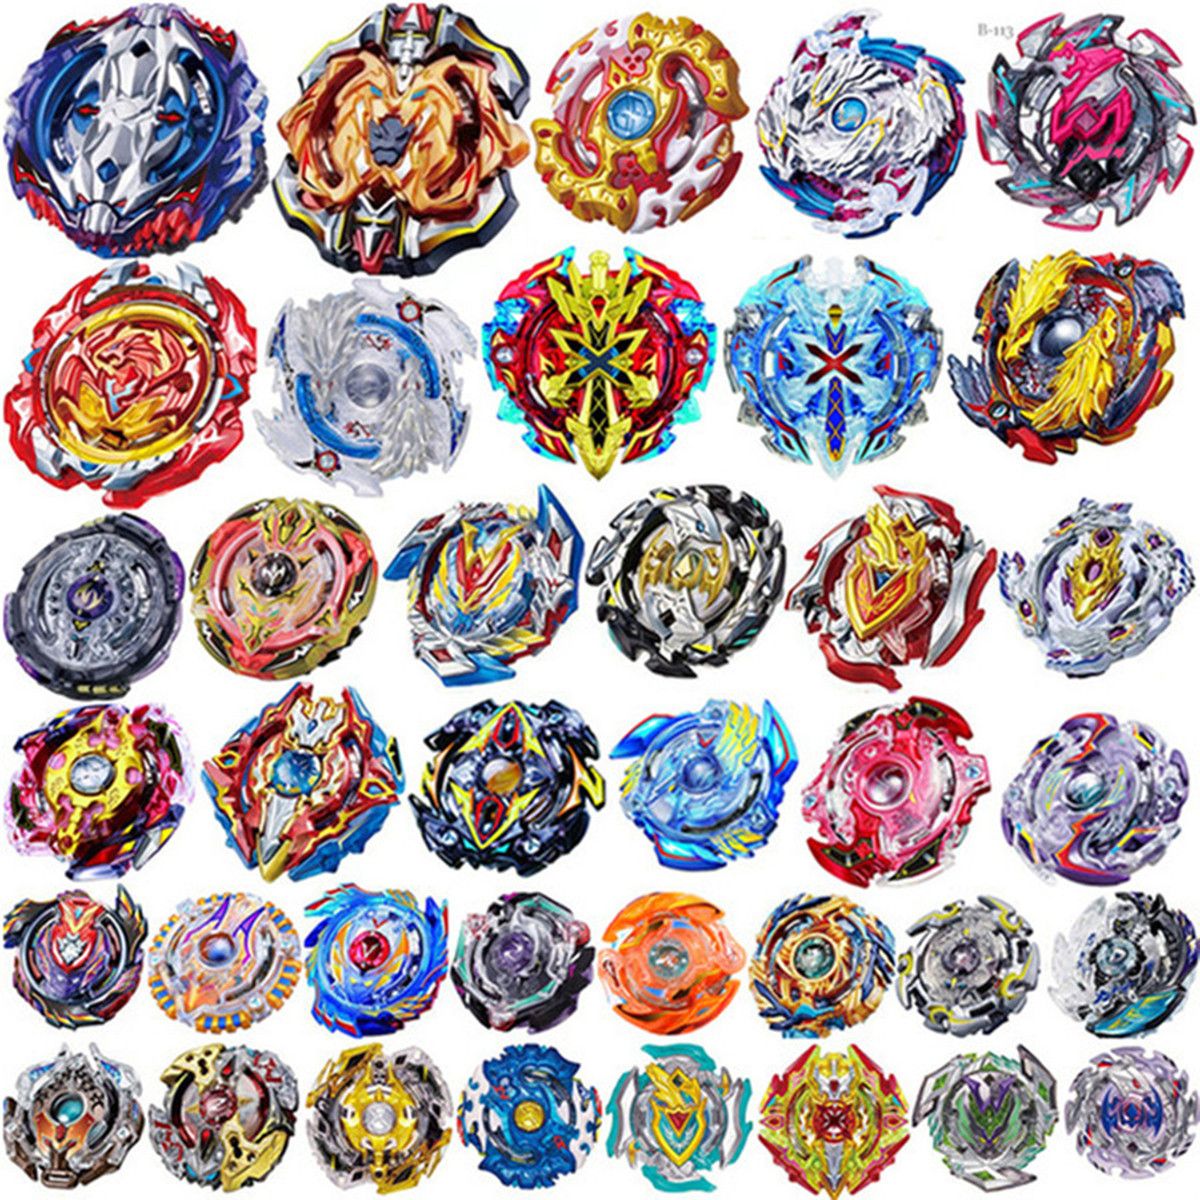 all types of beyblades